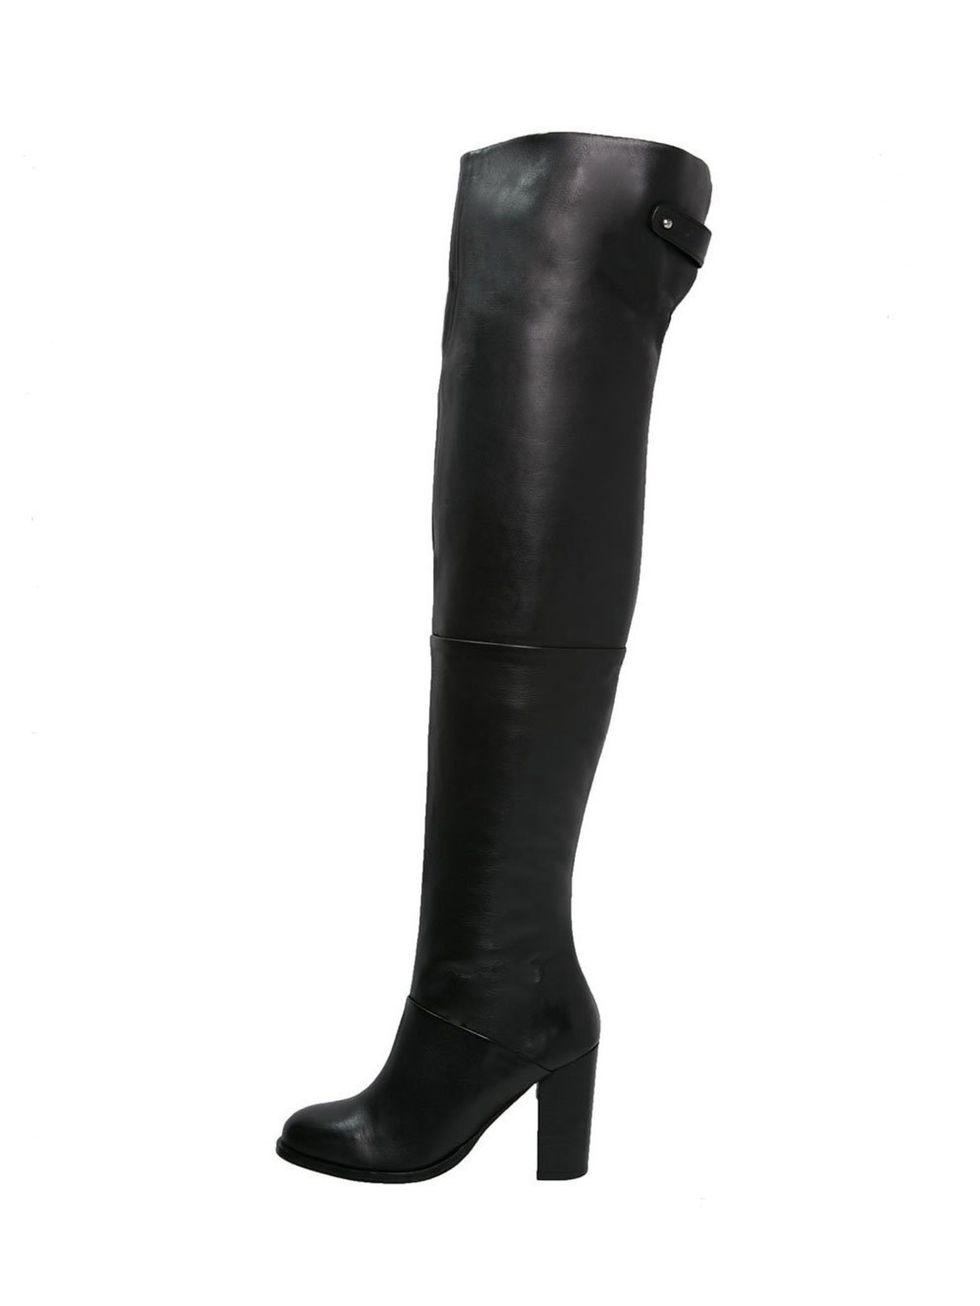 Boot, Shoe, Riding boot, Leather, Black, Knee-high boot, Costume accessory, Liver, Synthetic rubber, Rain boot, 